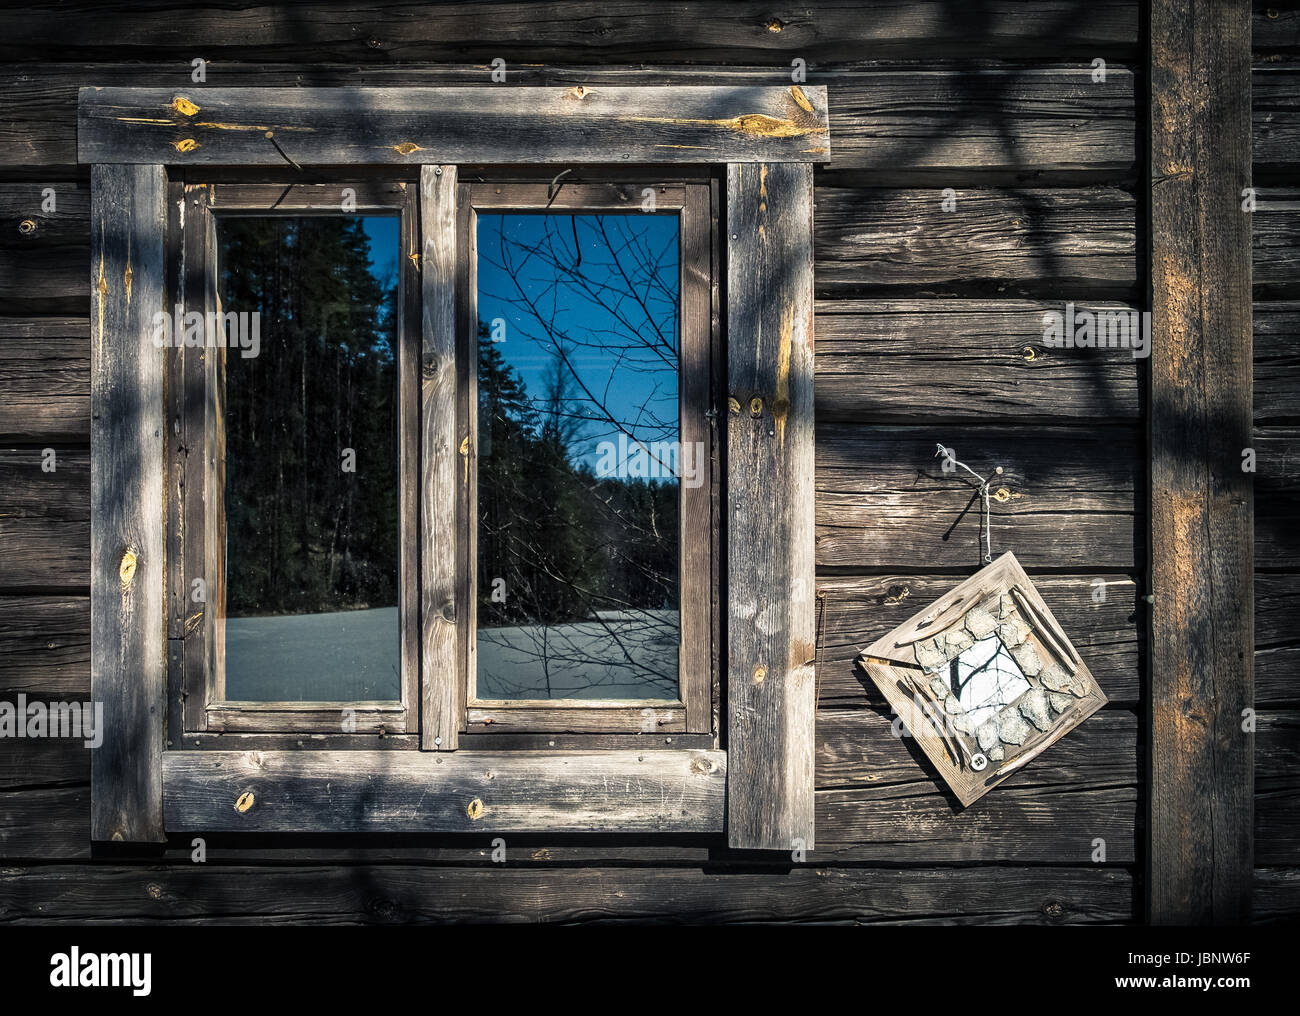 Abandoned house wooden wall with window reflection Stock Photo